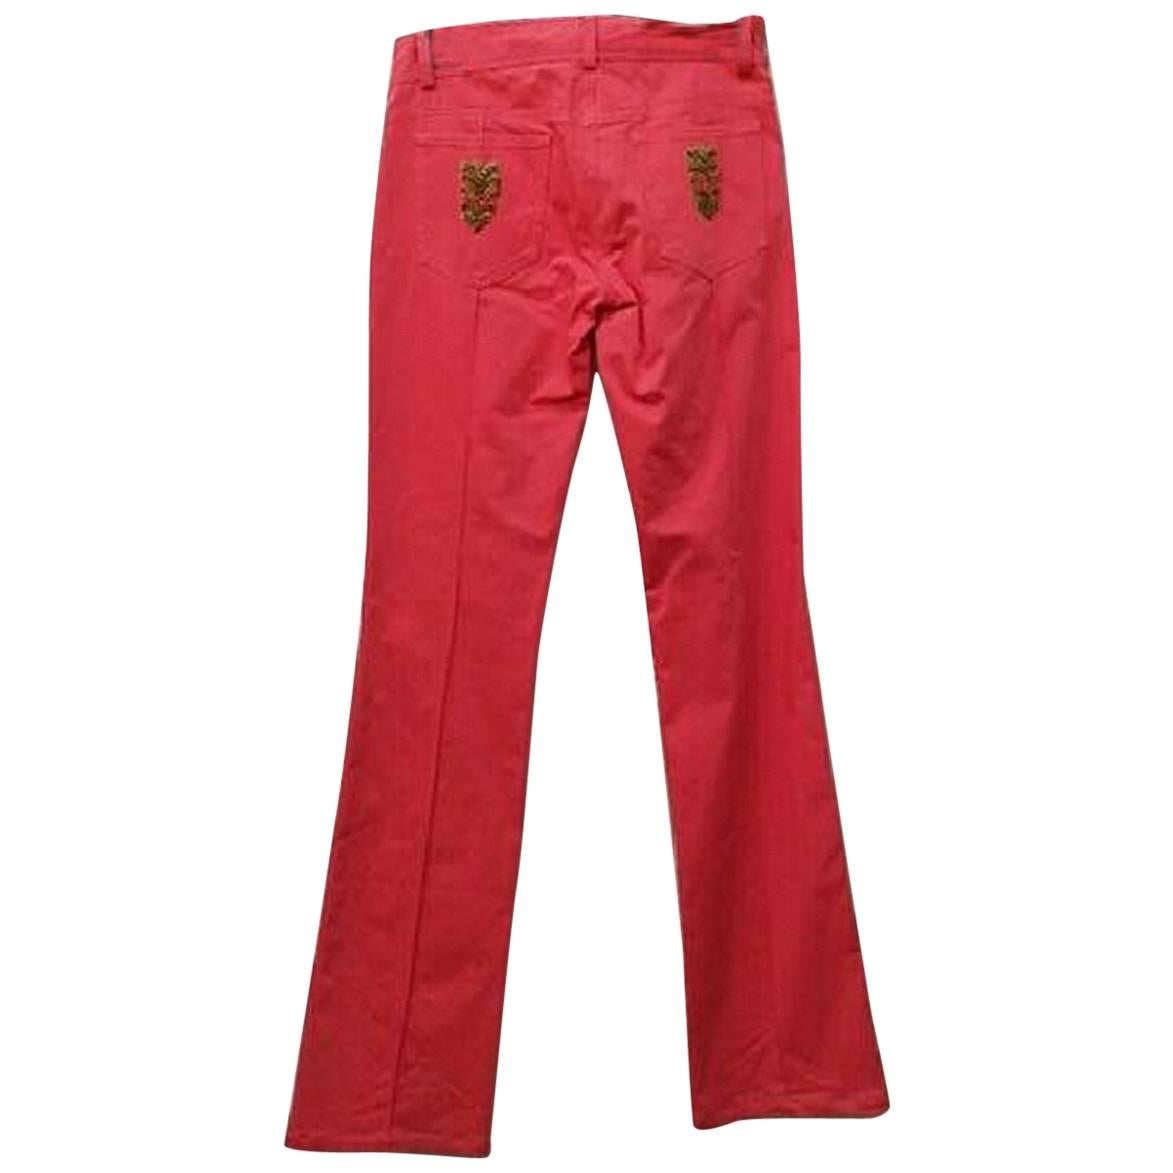 Roberto Cavalli Class Casual Trousers Pants - Size: 8 (M, 29, 30) For Sale